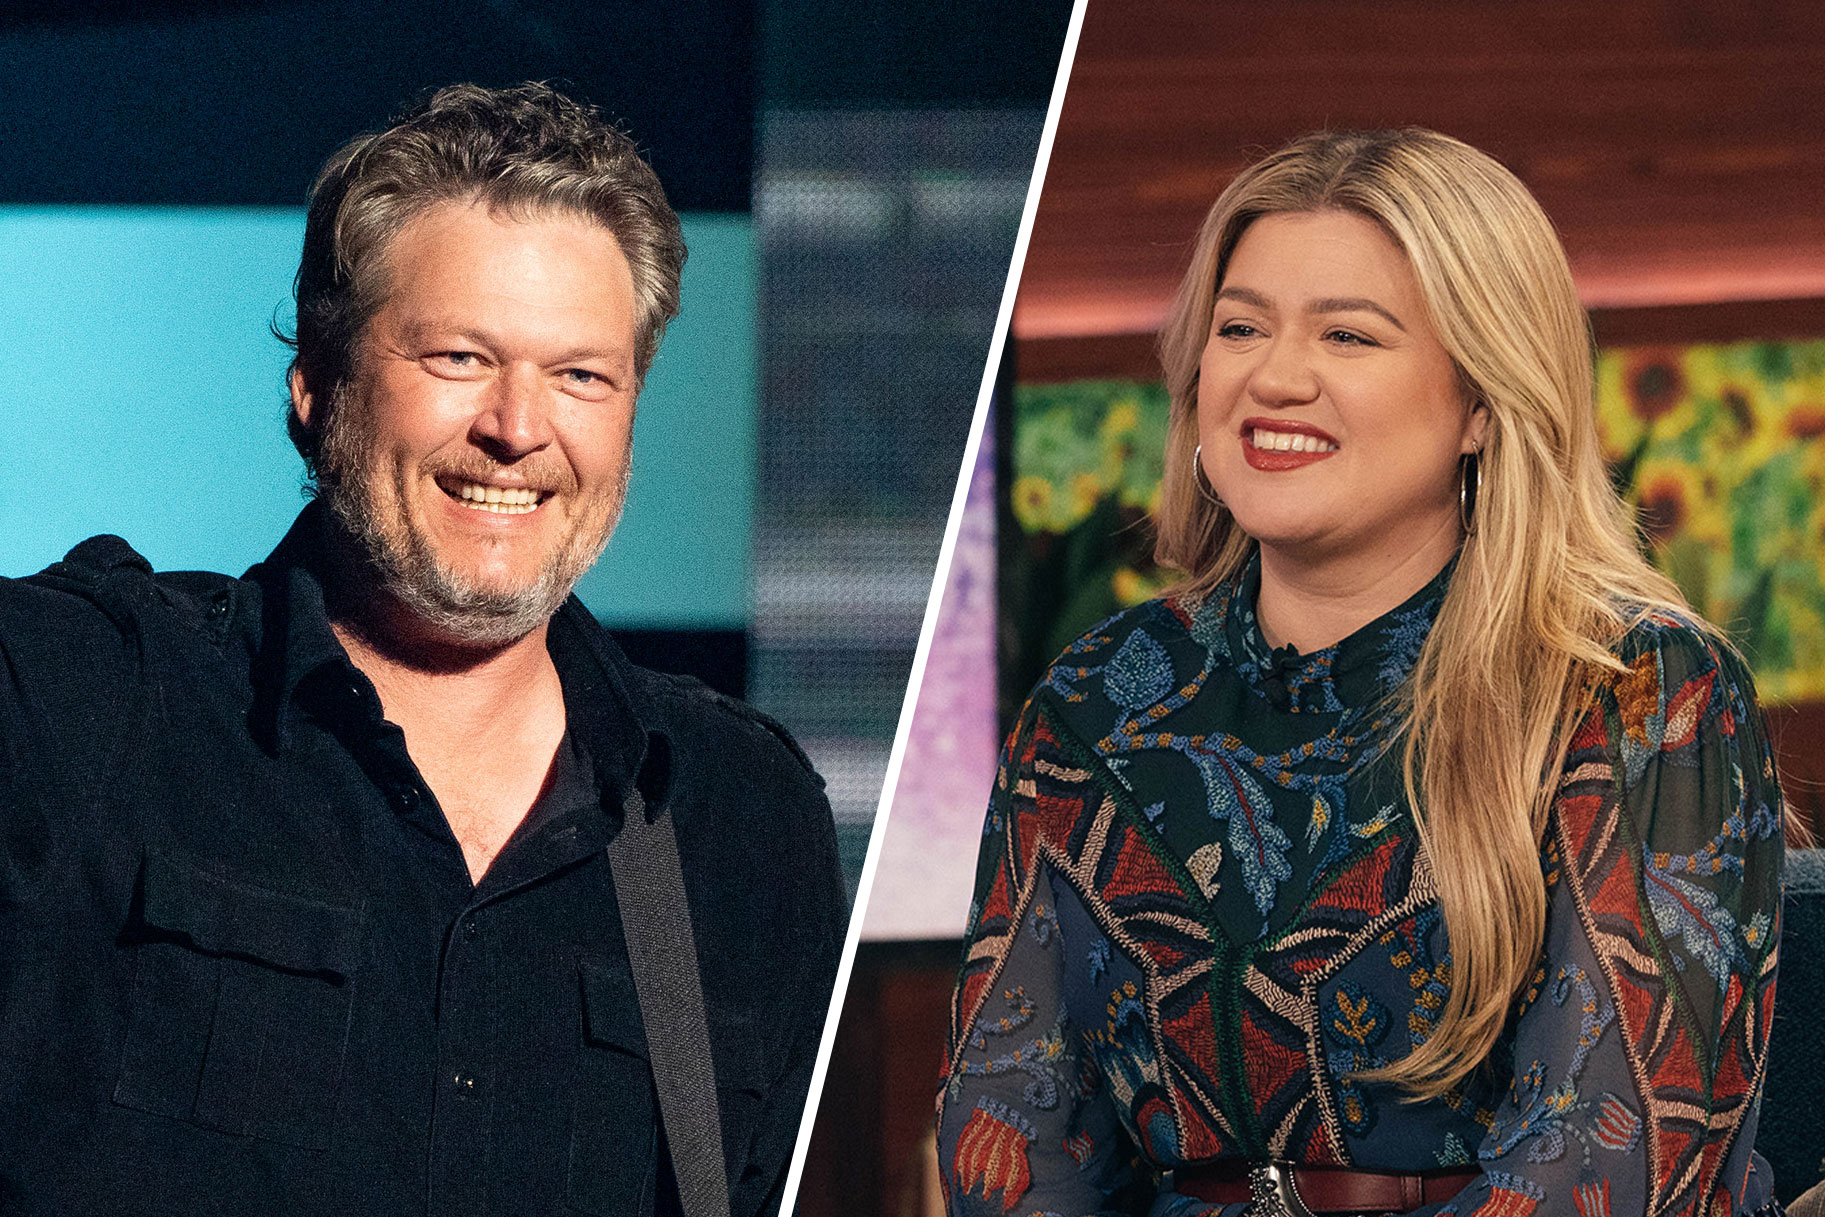 Blake Shelton Has the Funniest Story About Drinking With Kelly Clarkson